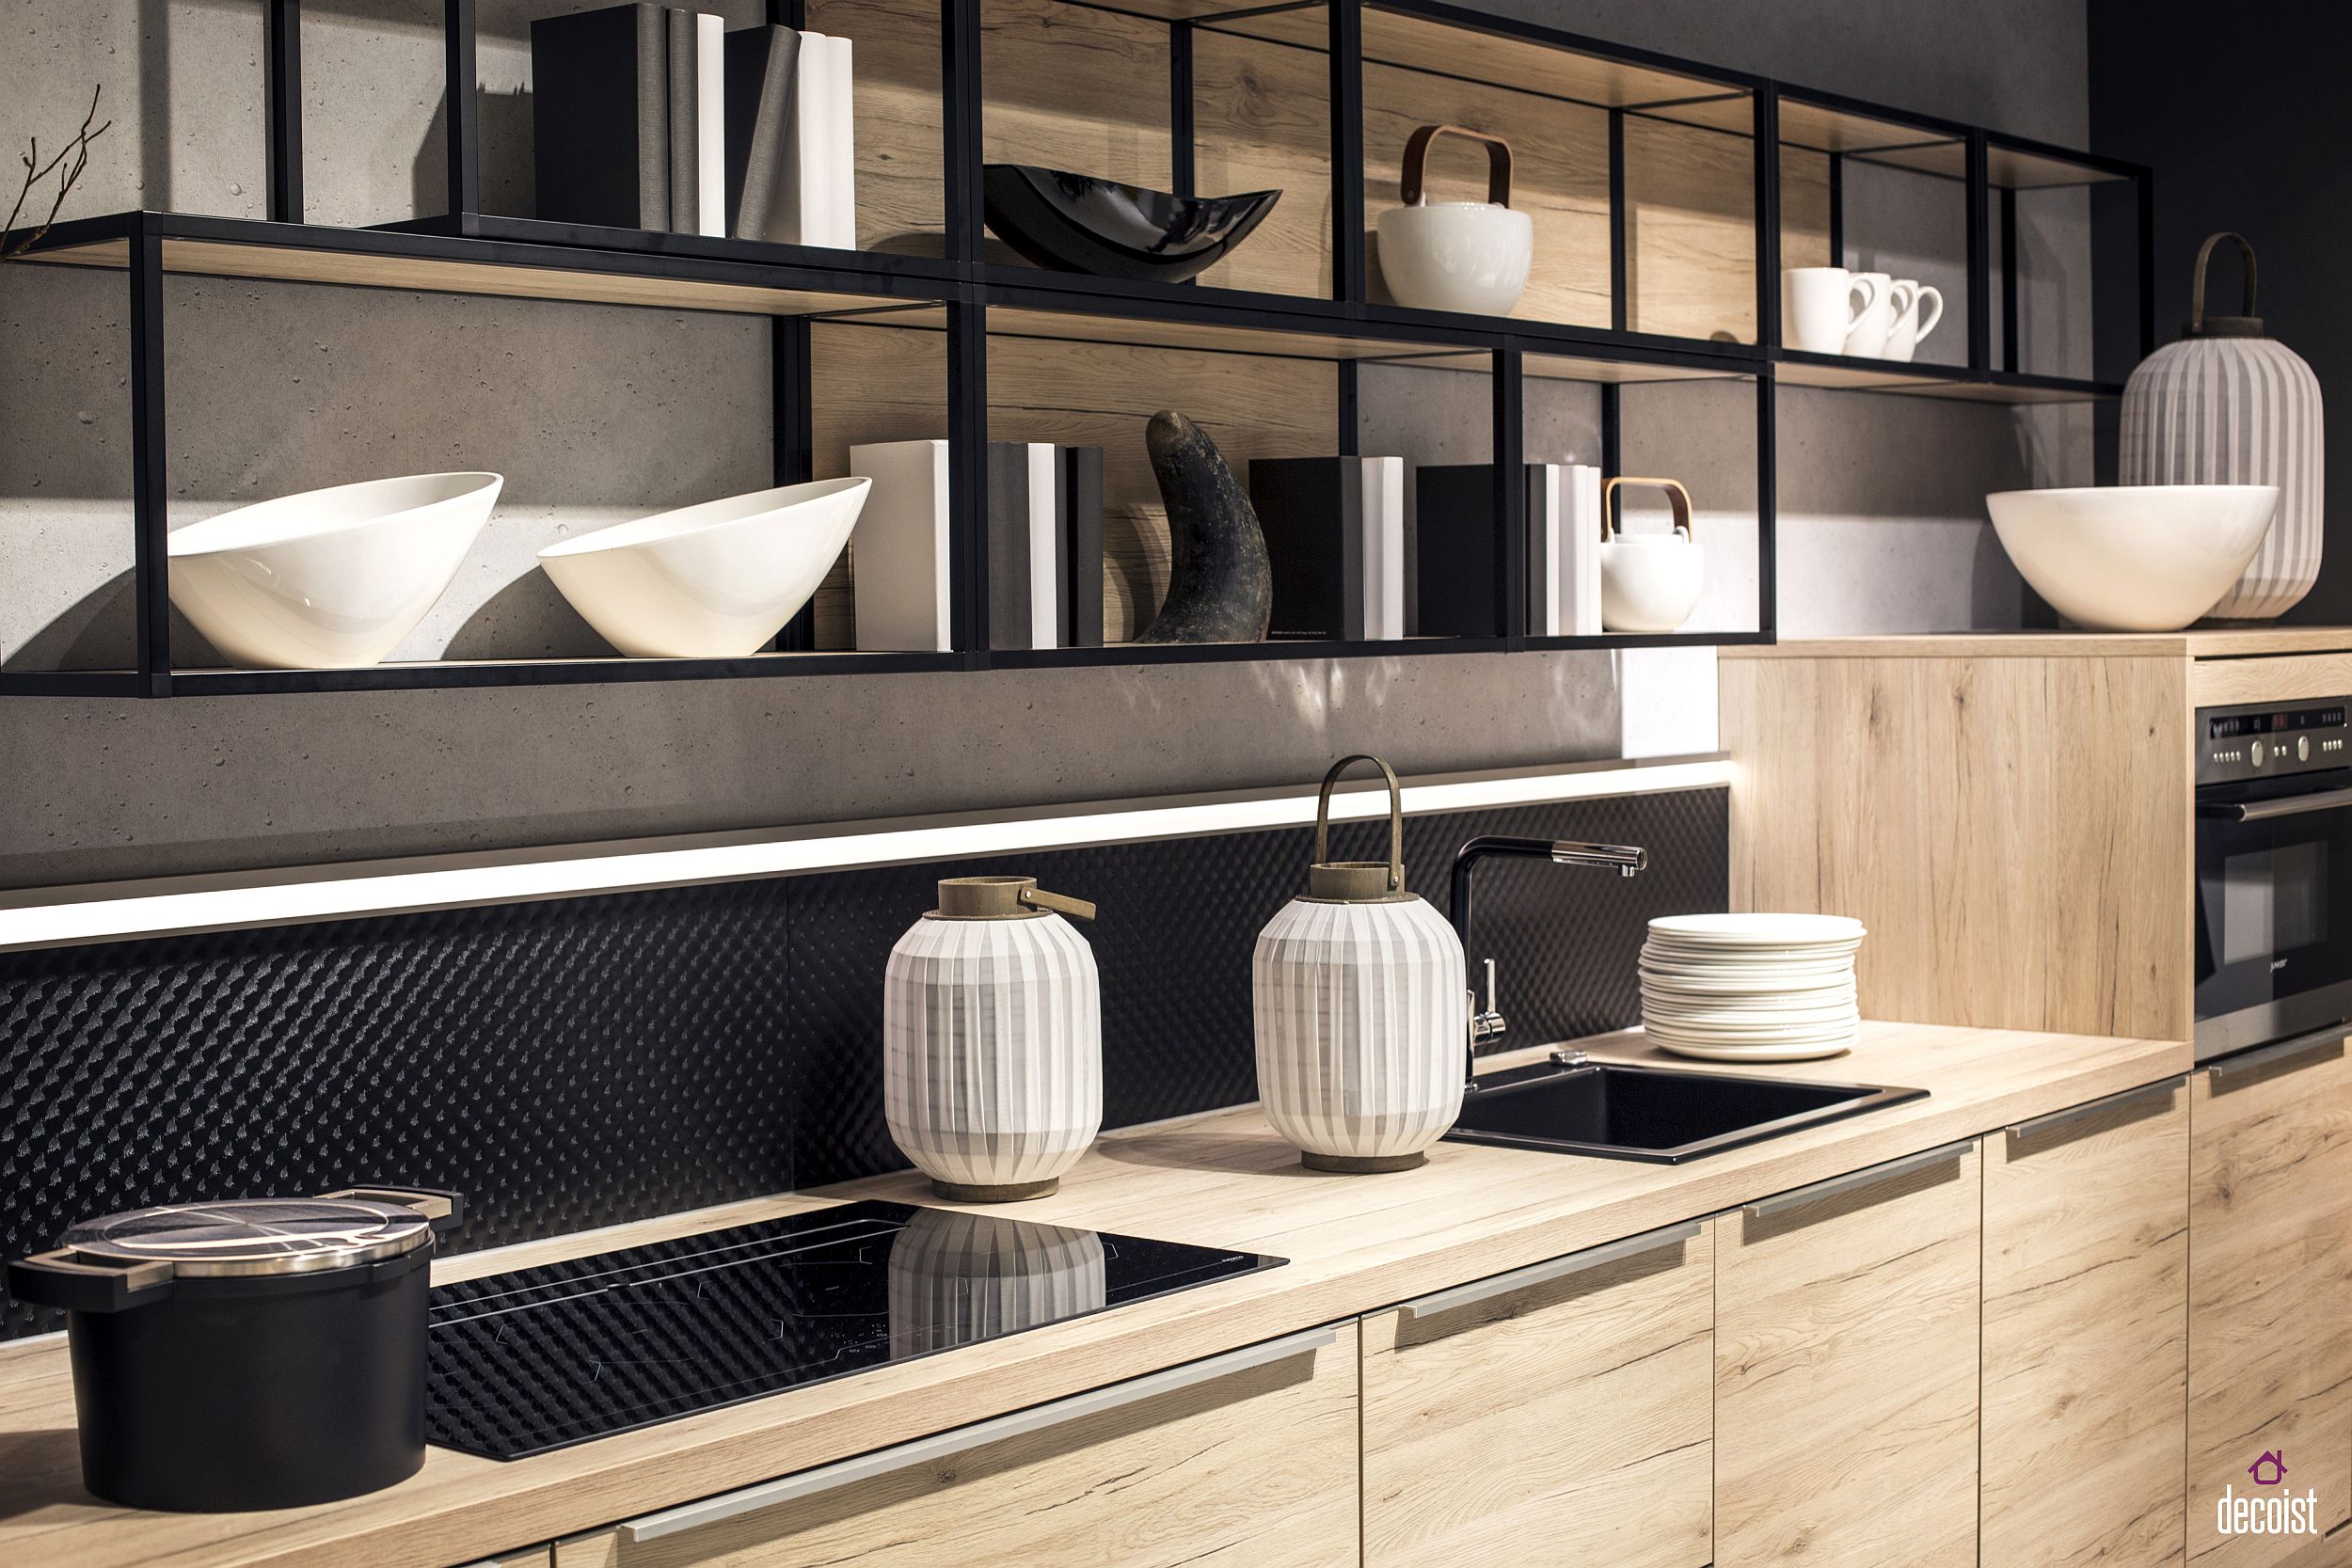 Black-metallic-frame-gives-these-kitchen-shelves-a-modern-industrial-style